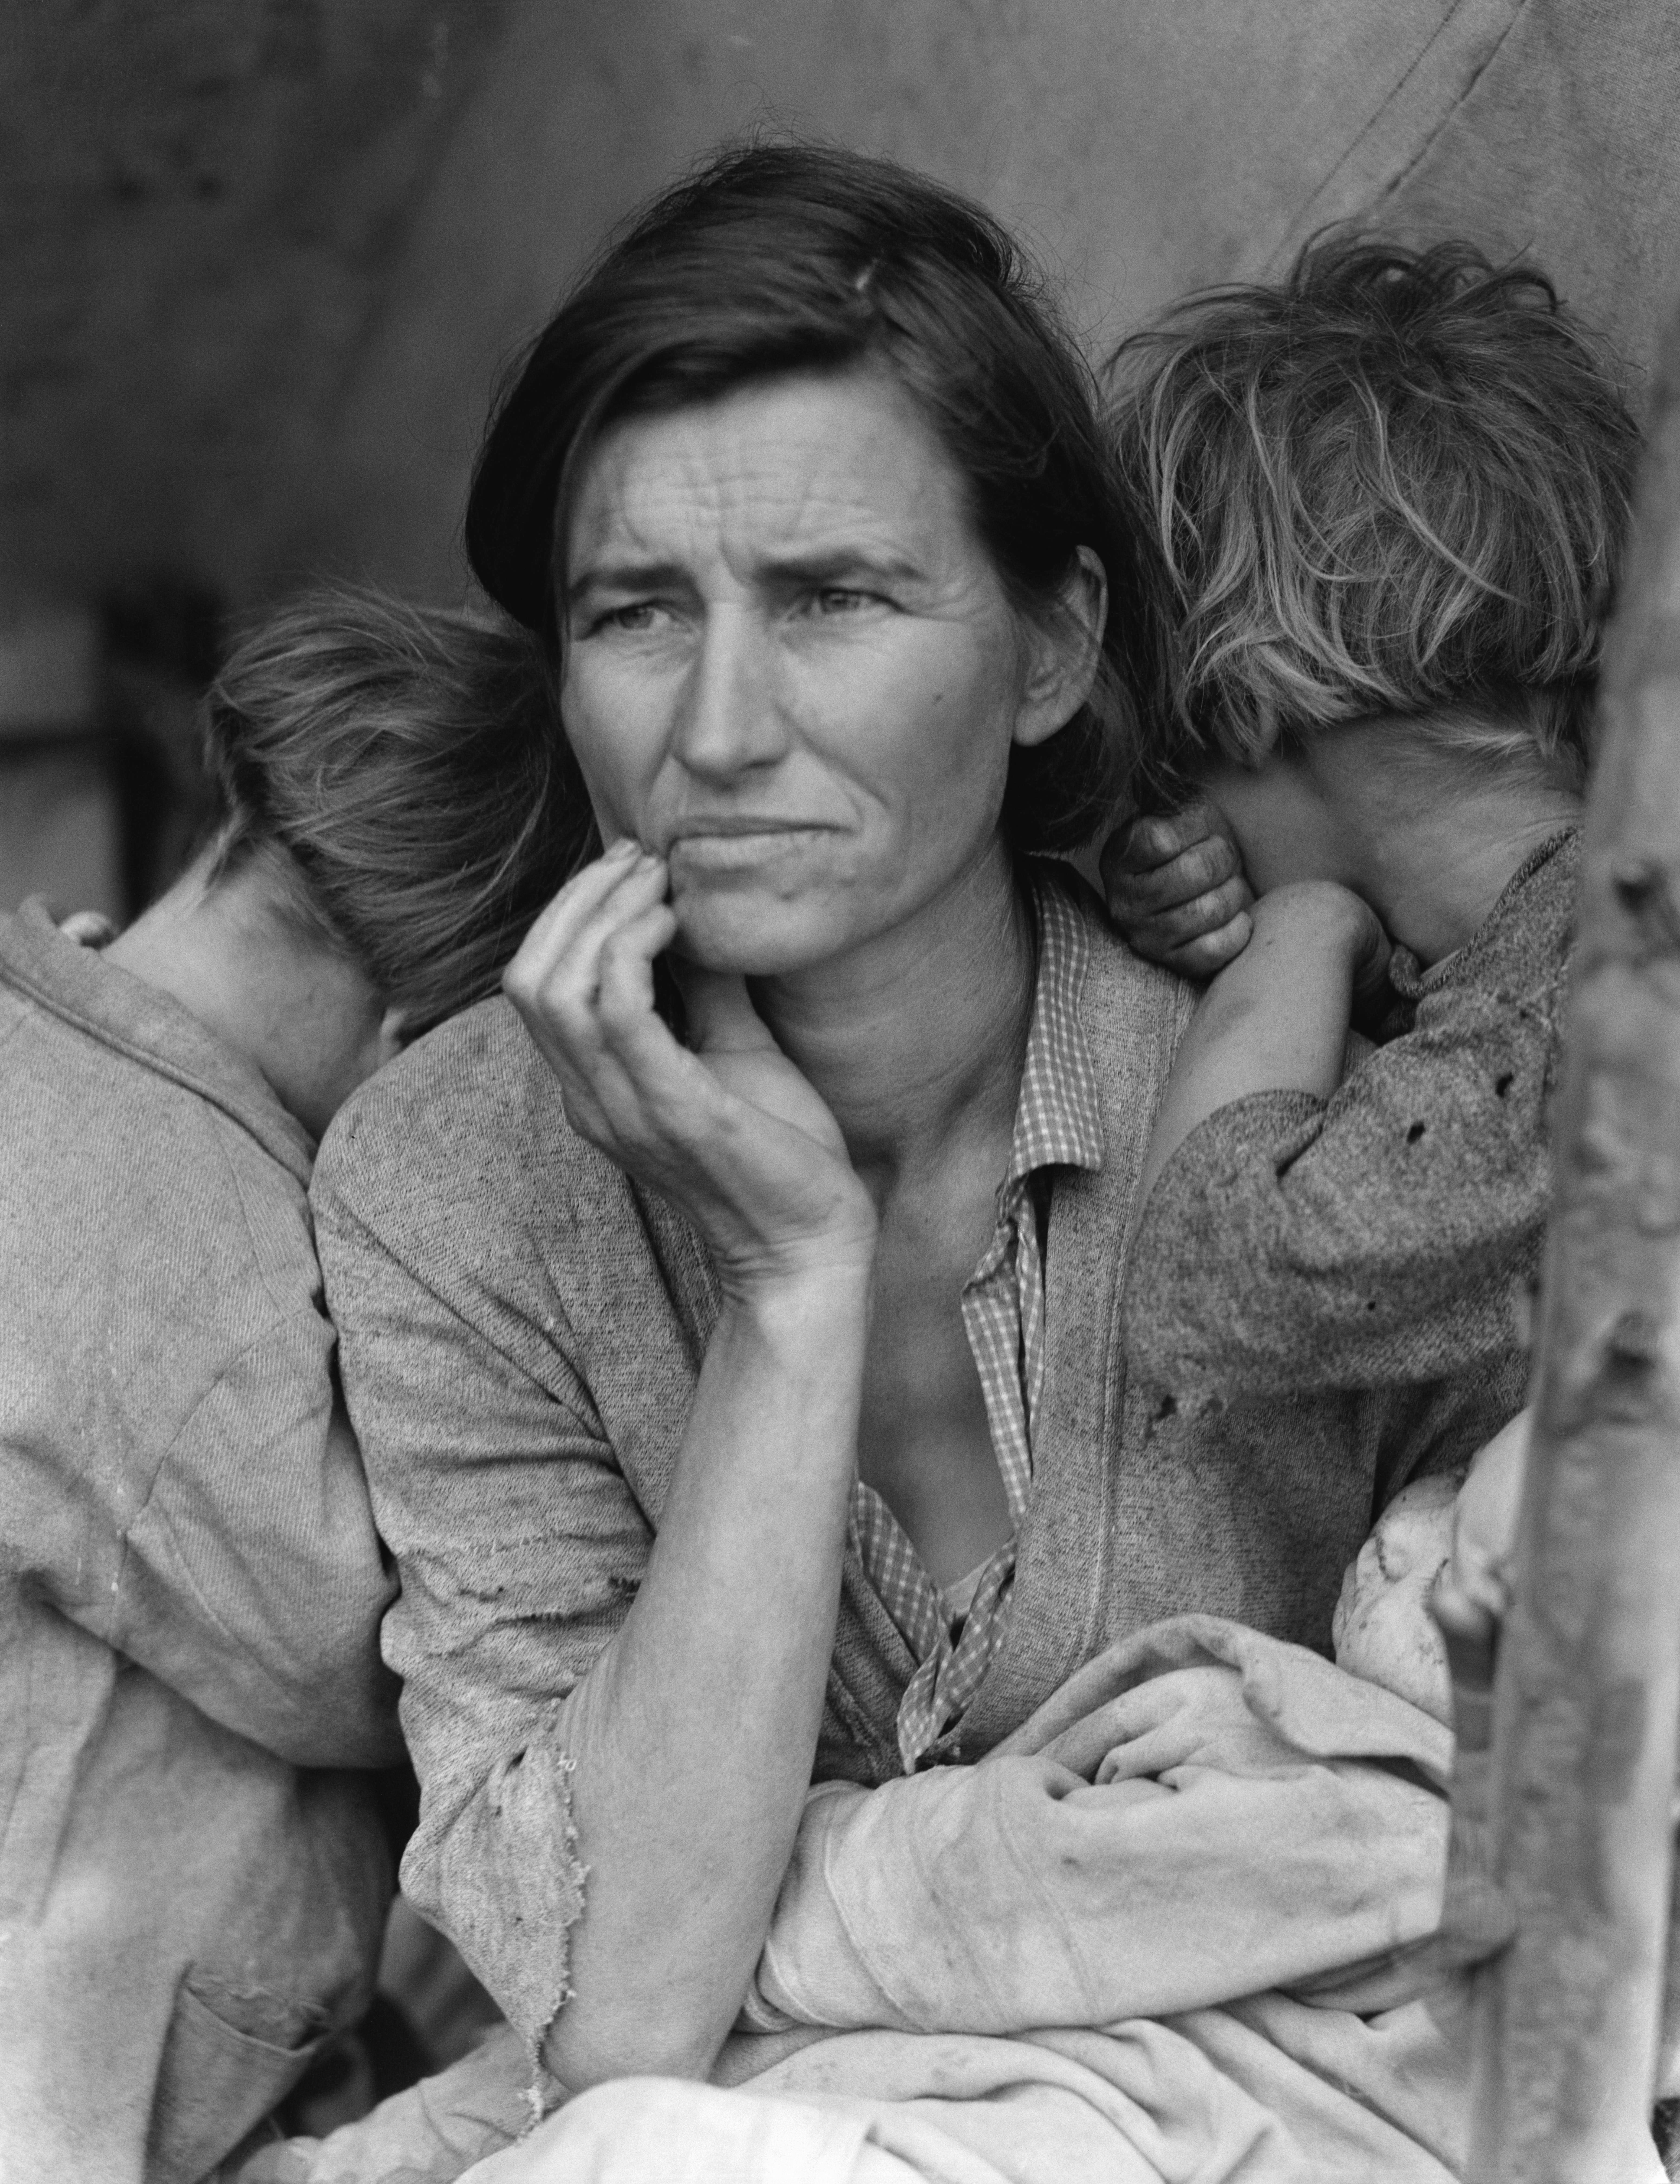 Dorothea Lange, Migrant Mother, Nipomo California, 1936, printed later, gelatin silver print, 35.24 x 27.78 cm (Los Angeles County Museum of Art)